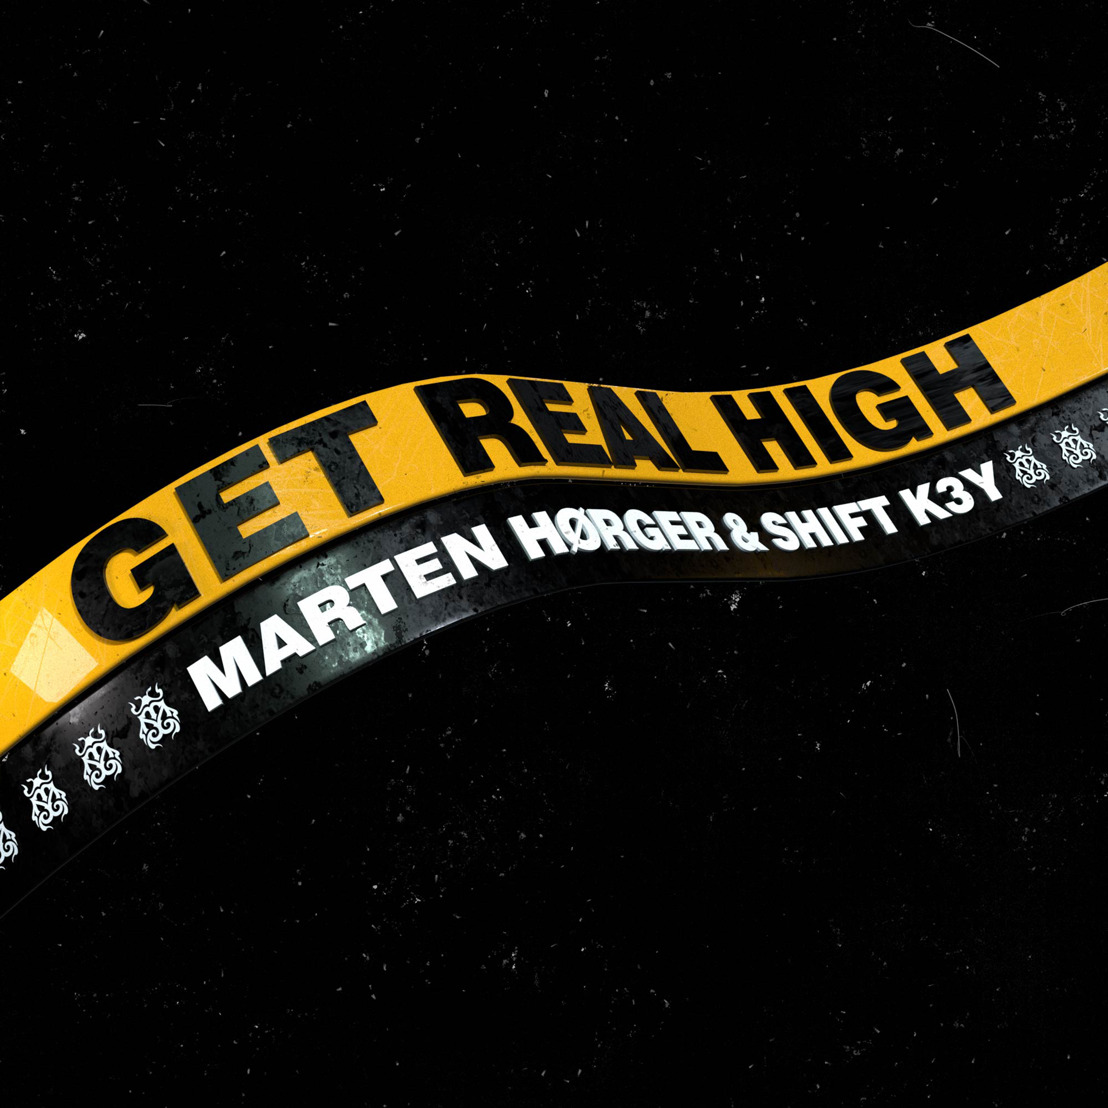 Marten Hørger unleashes his groovy house heater ‘Get Real High’